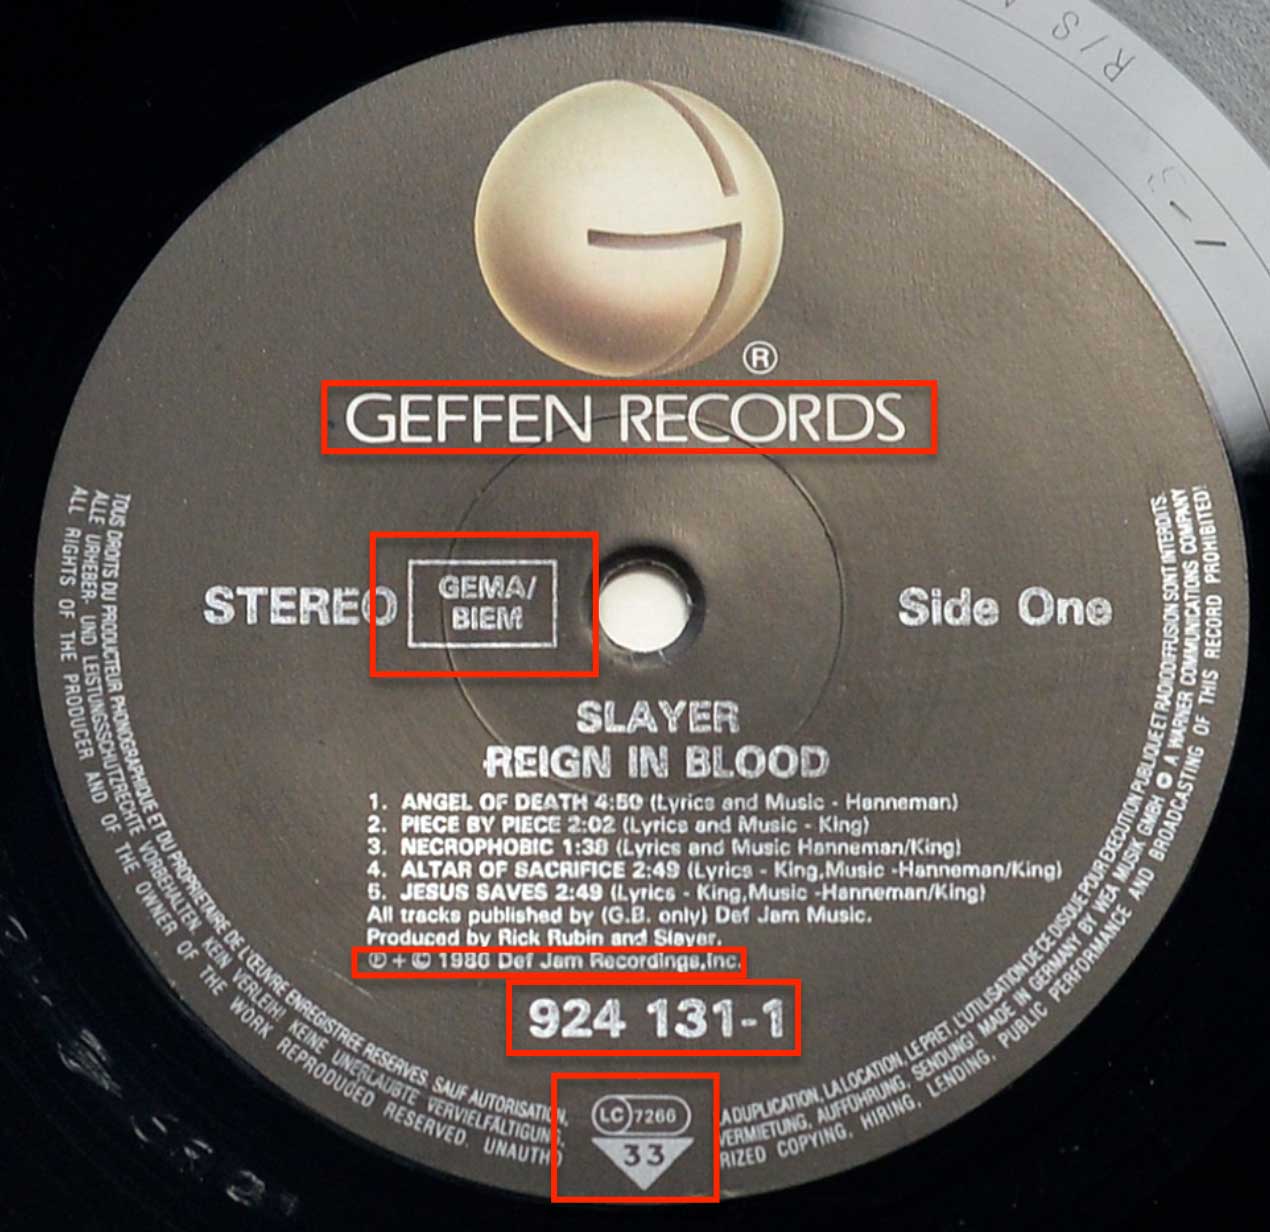 Photo of record label of SLAYER - Reign in Blood (Geffen Records) 